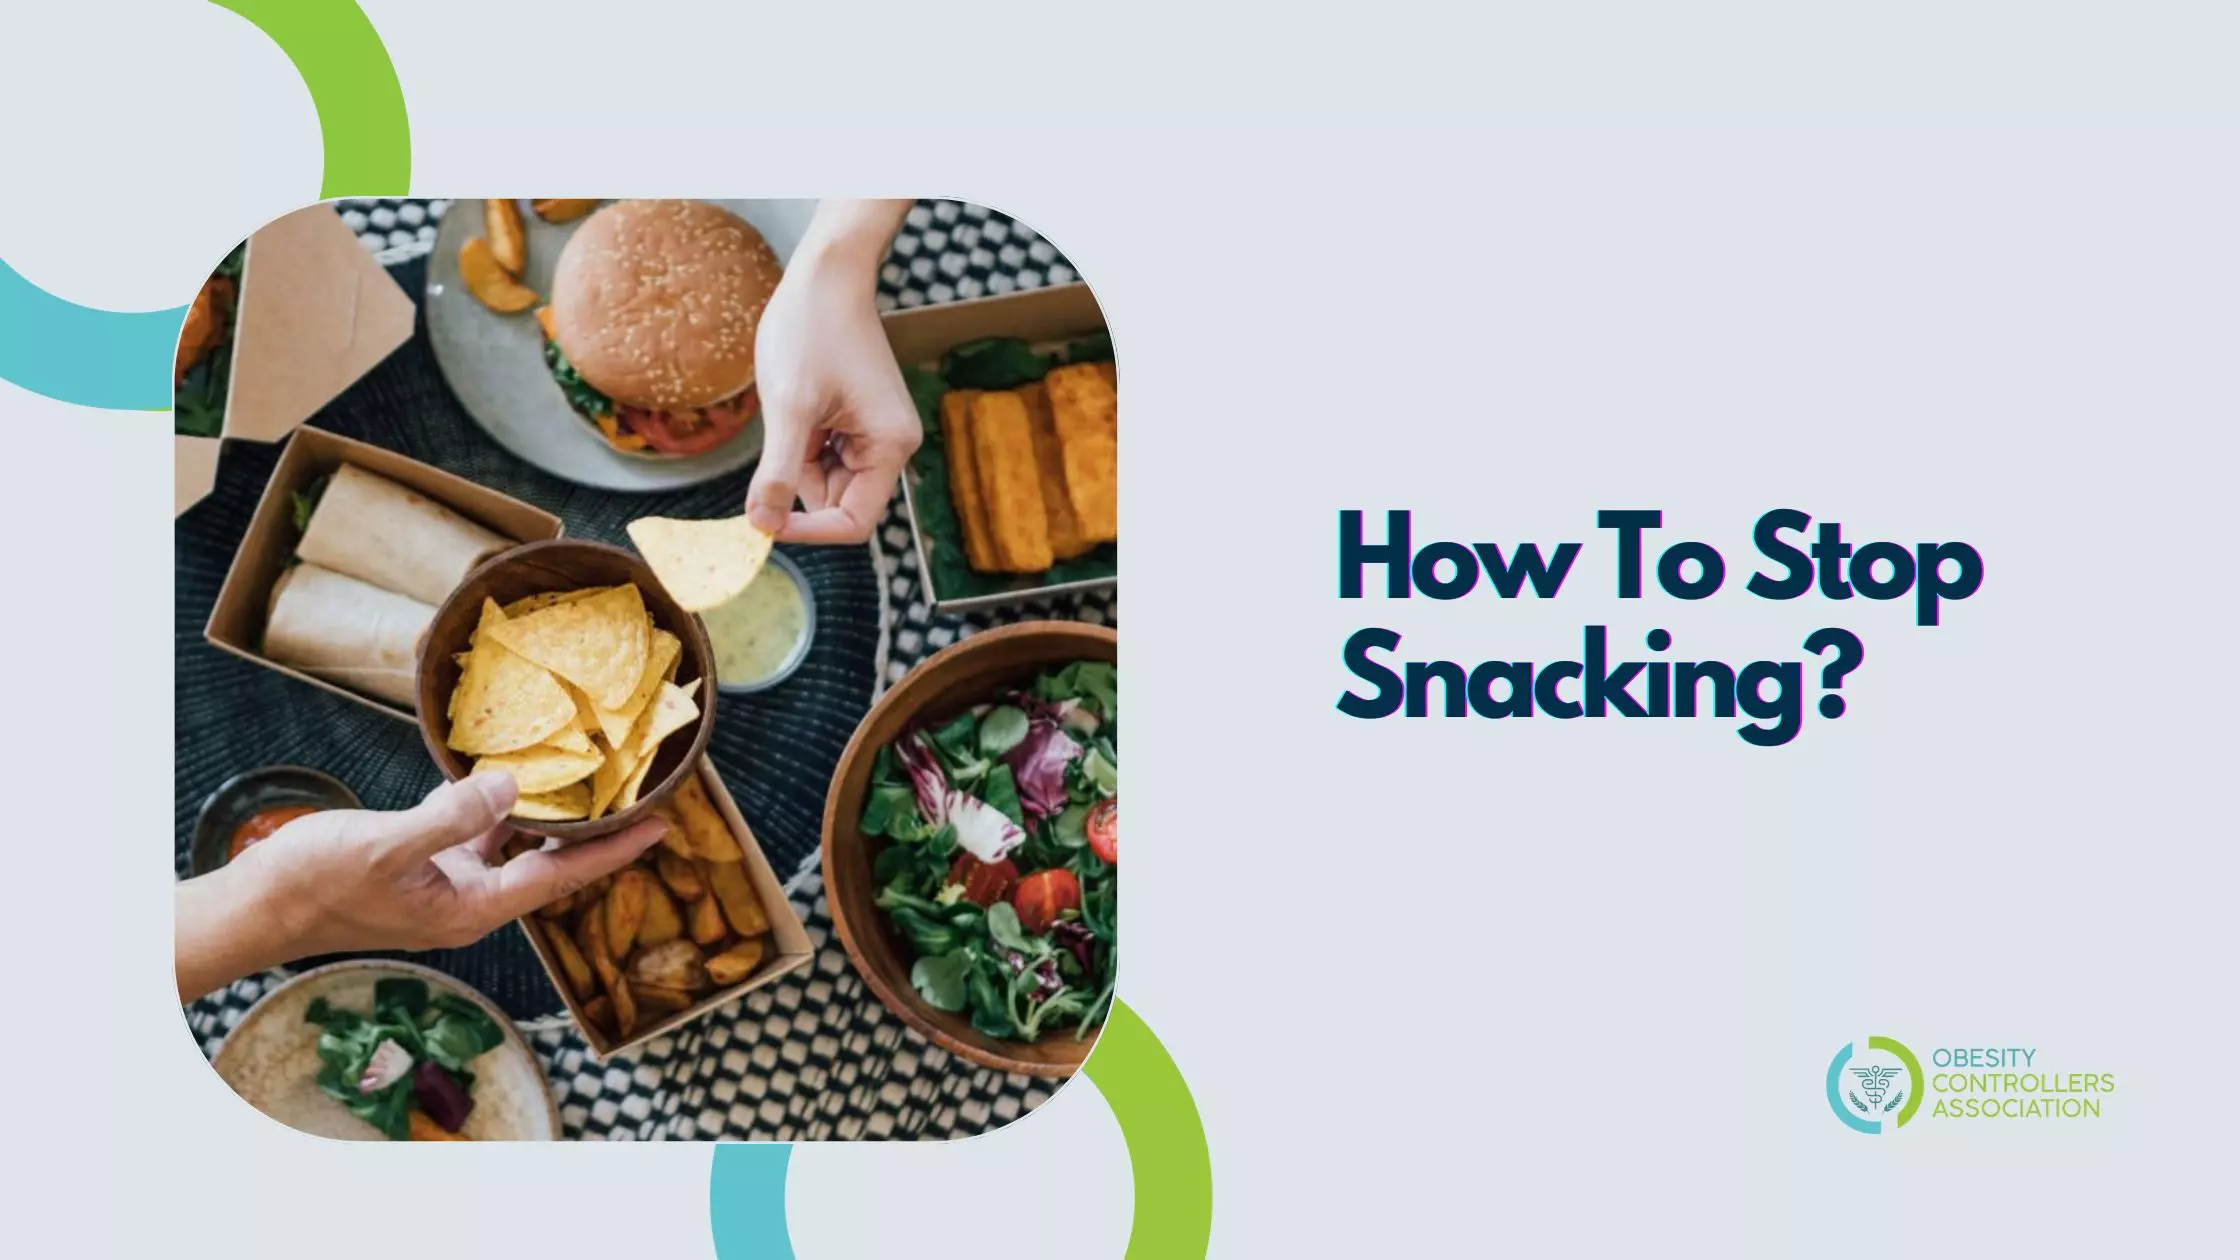 How To Stop Snacking